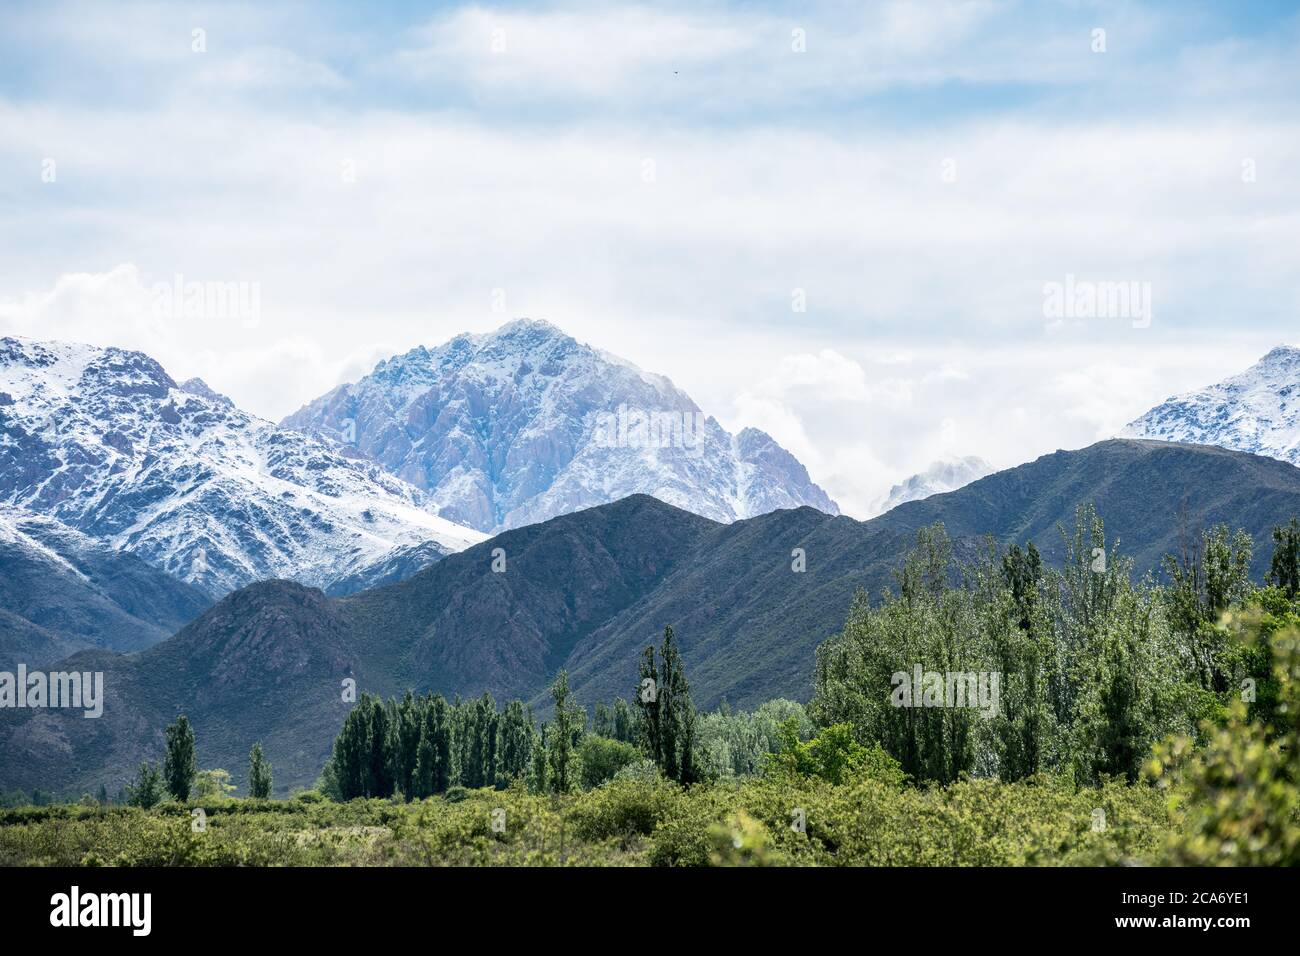 view of the andean mountain range nevada in mendoza argentina Stock Photo